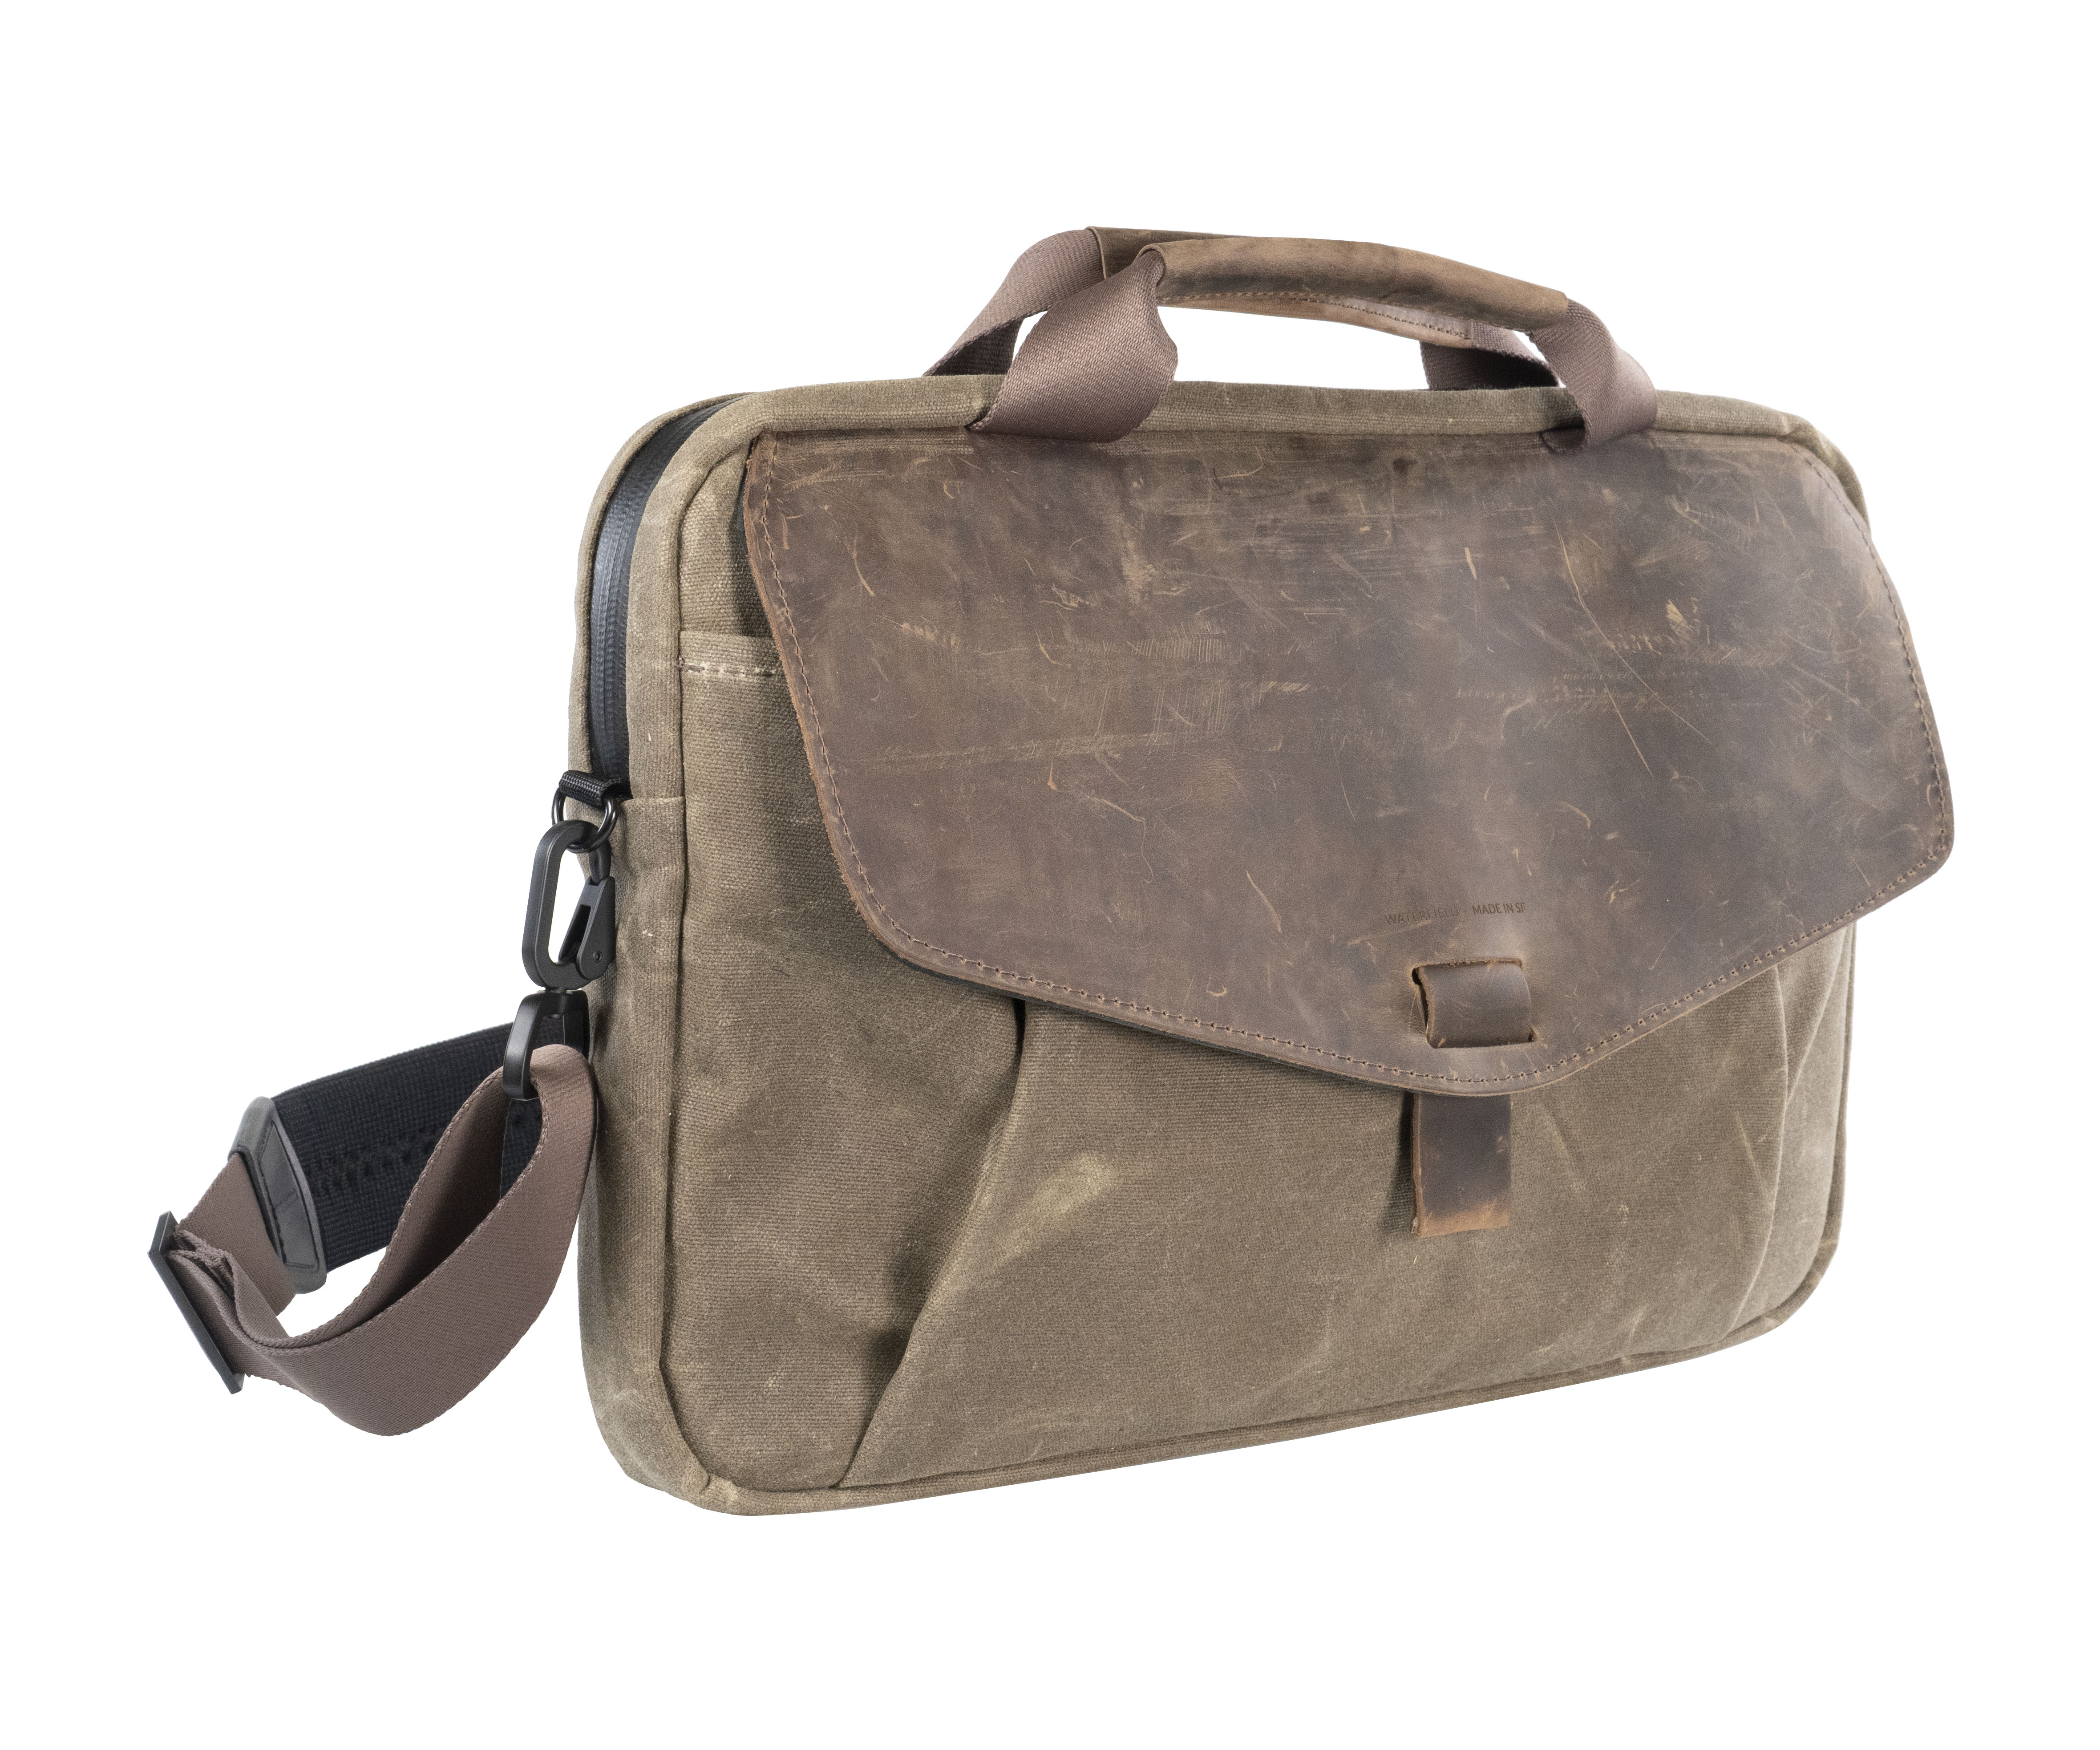 Three carry options: a detachable suspension shoulder strap, handles, and a wheeled suitcase passthrough